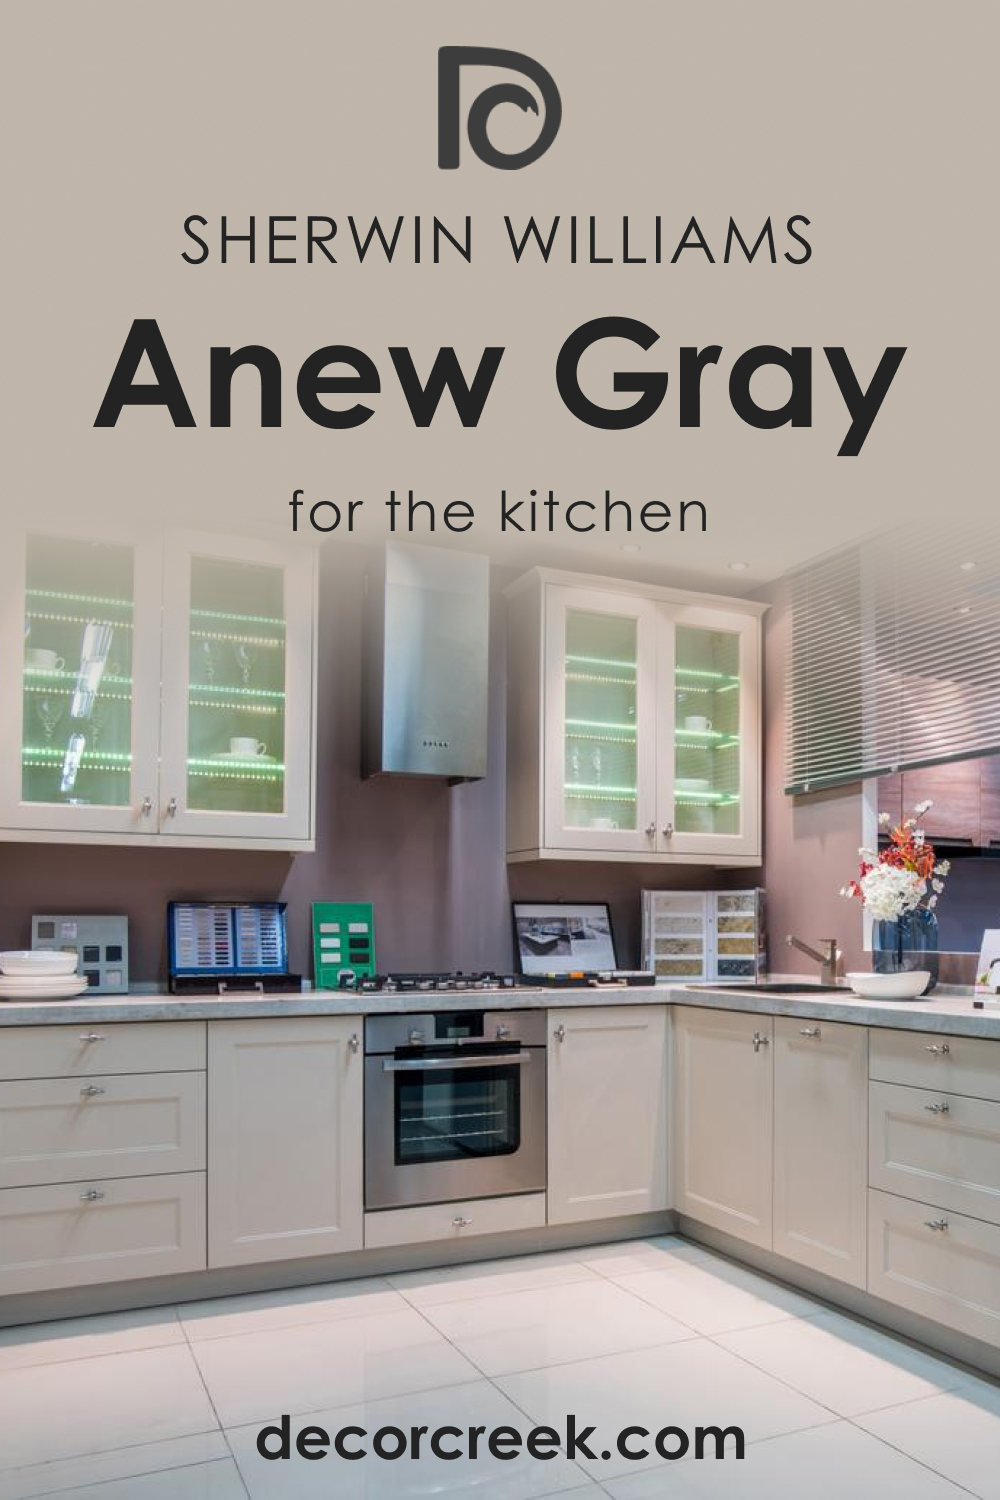 How to Use SW 7030 Anew Gray for the Kitchen?